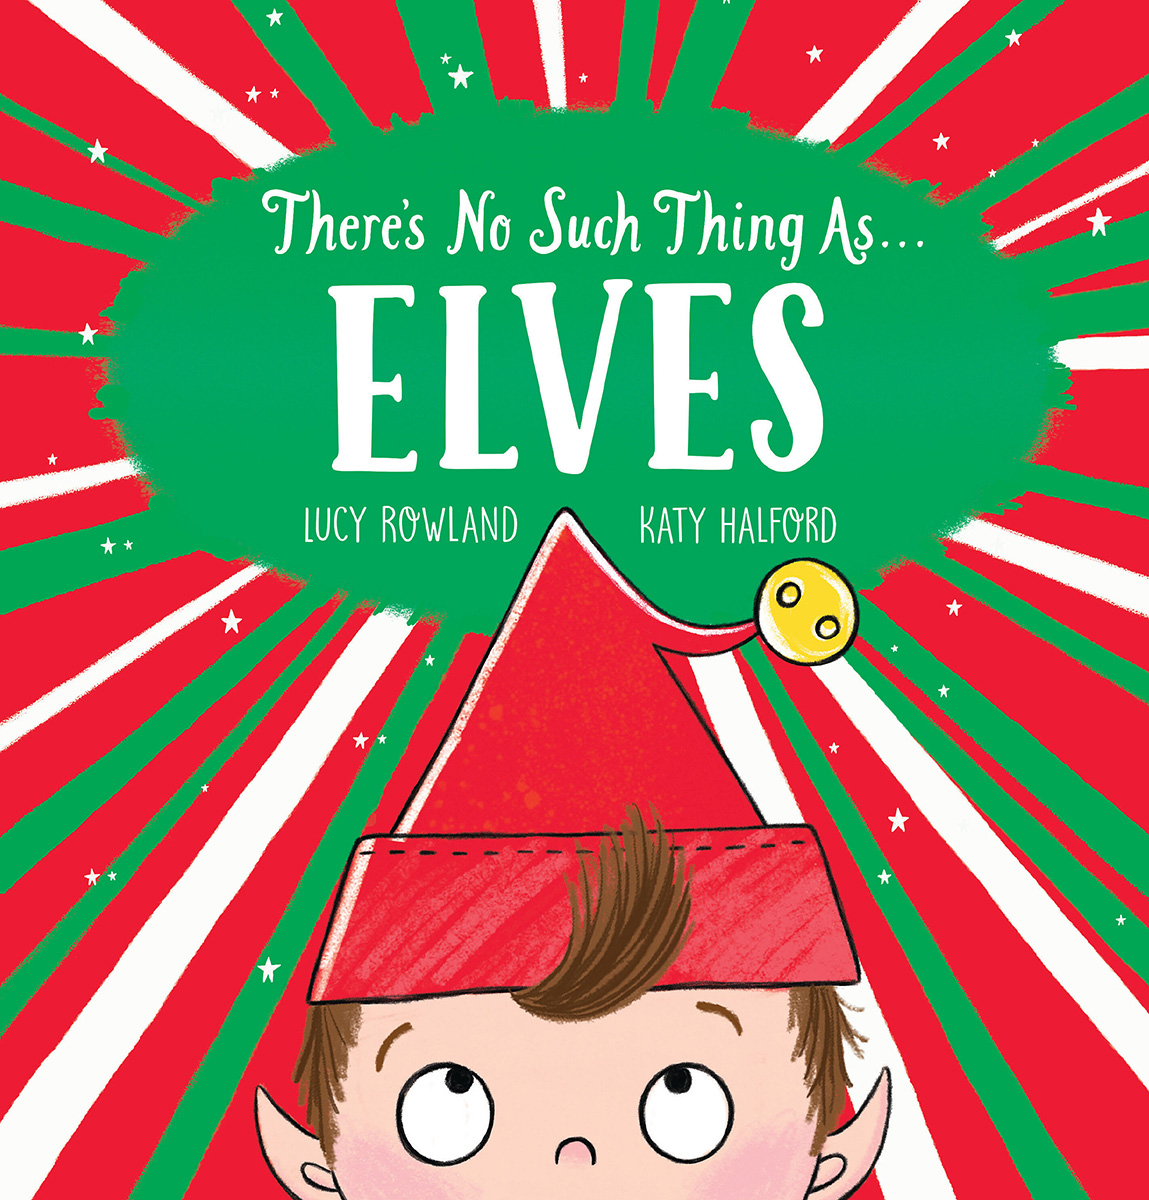  There's No Such Thing As...Elves 